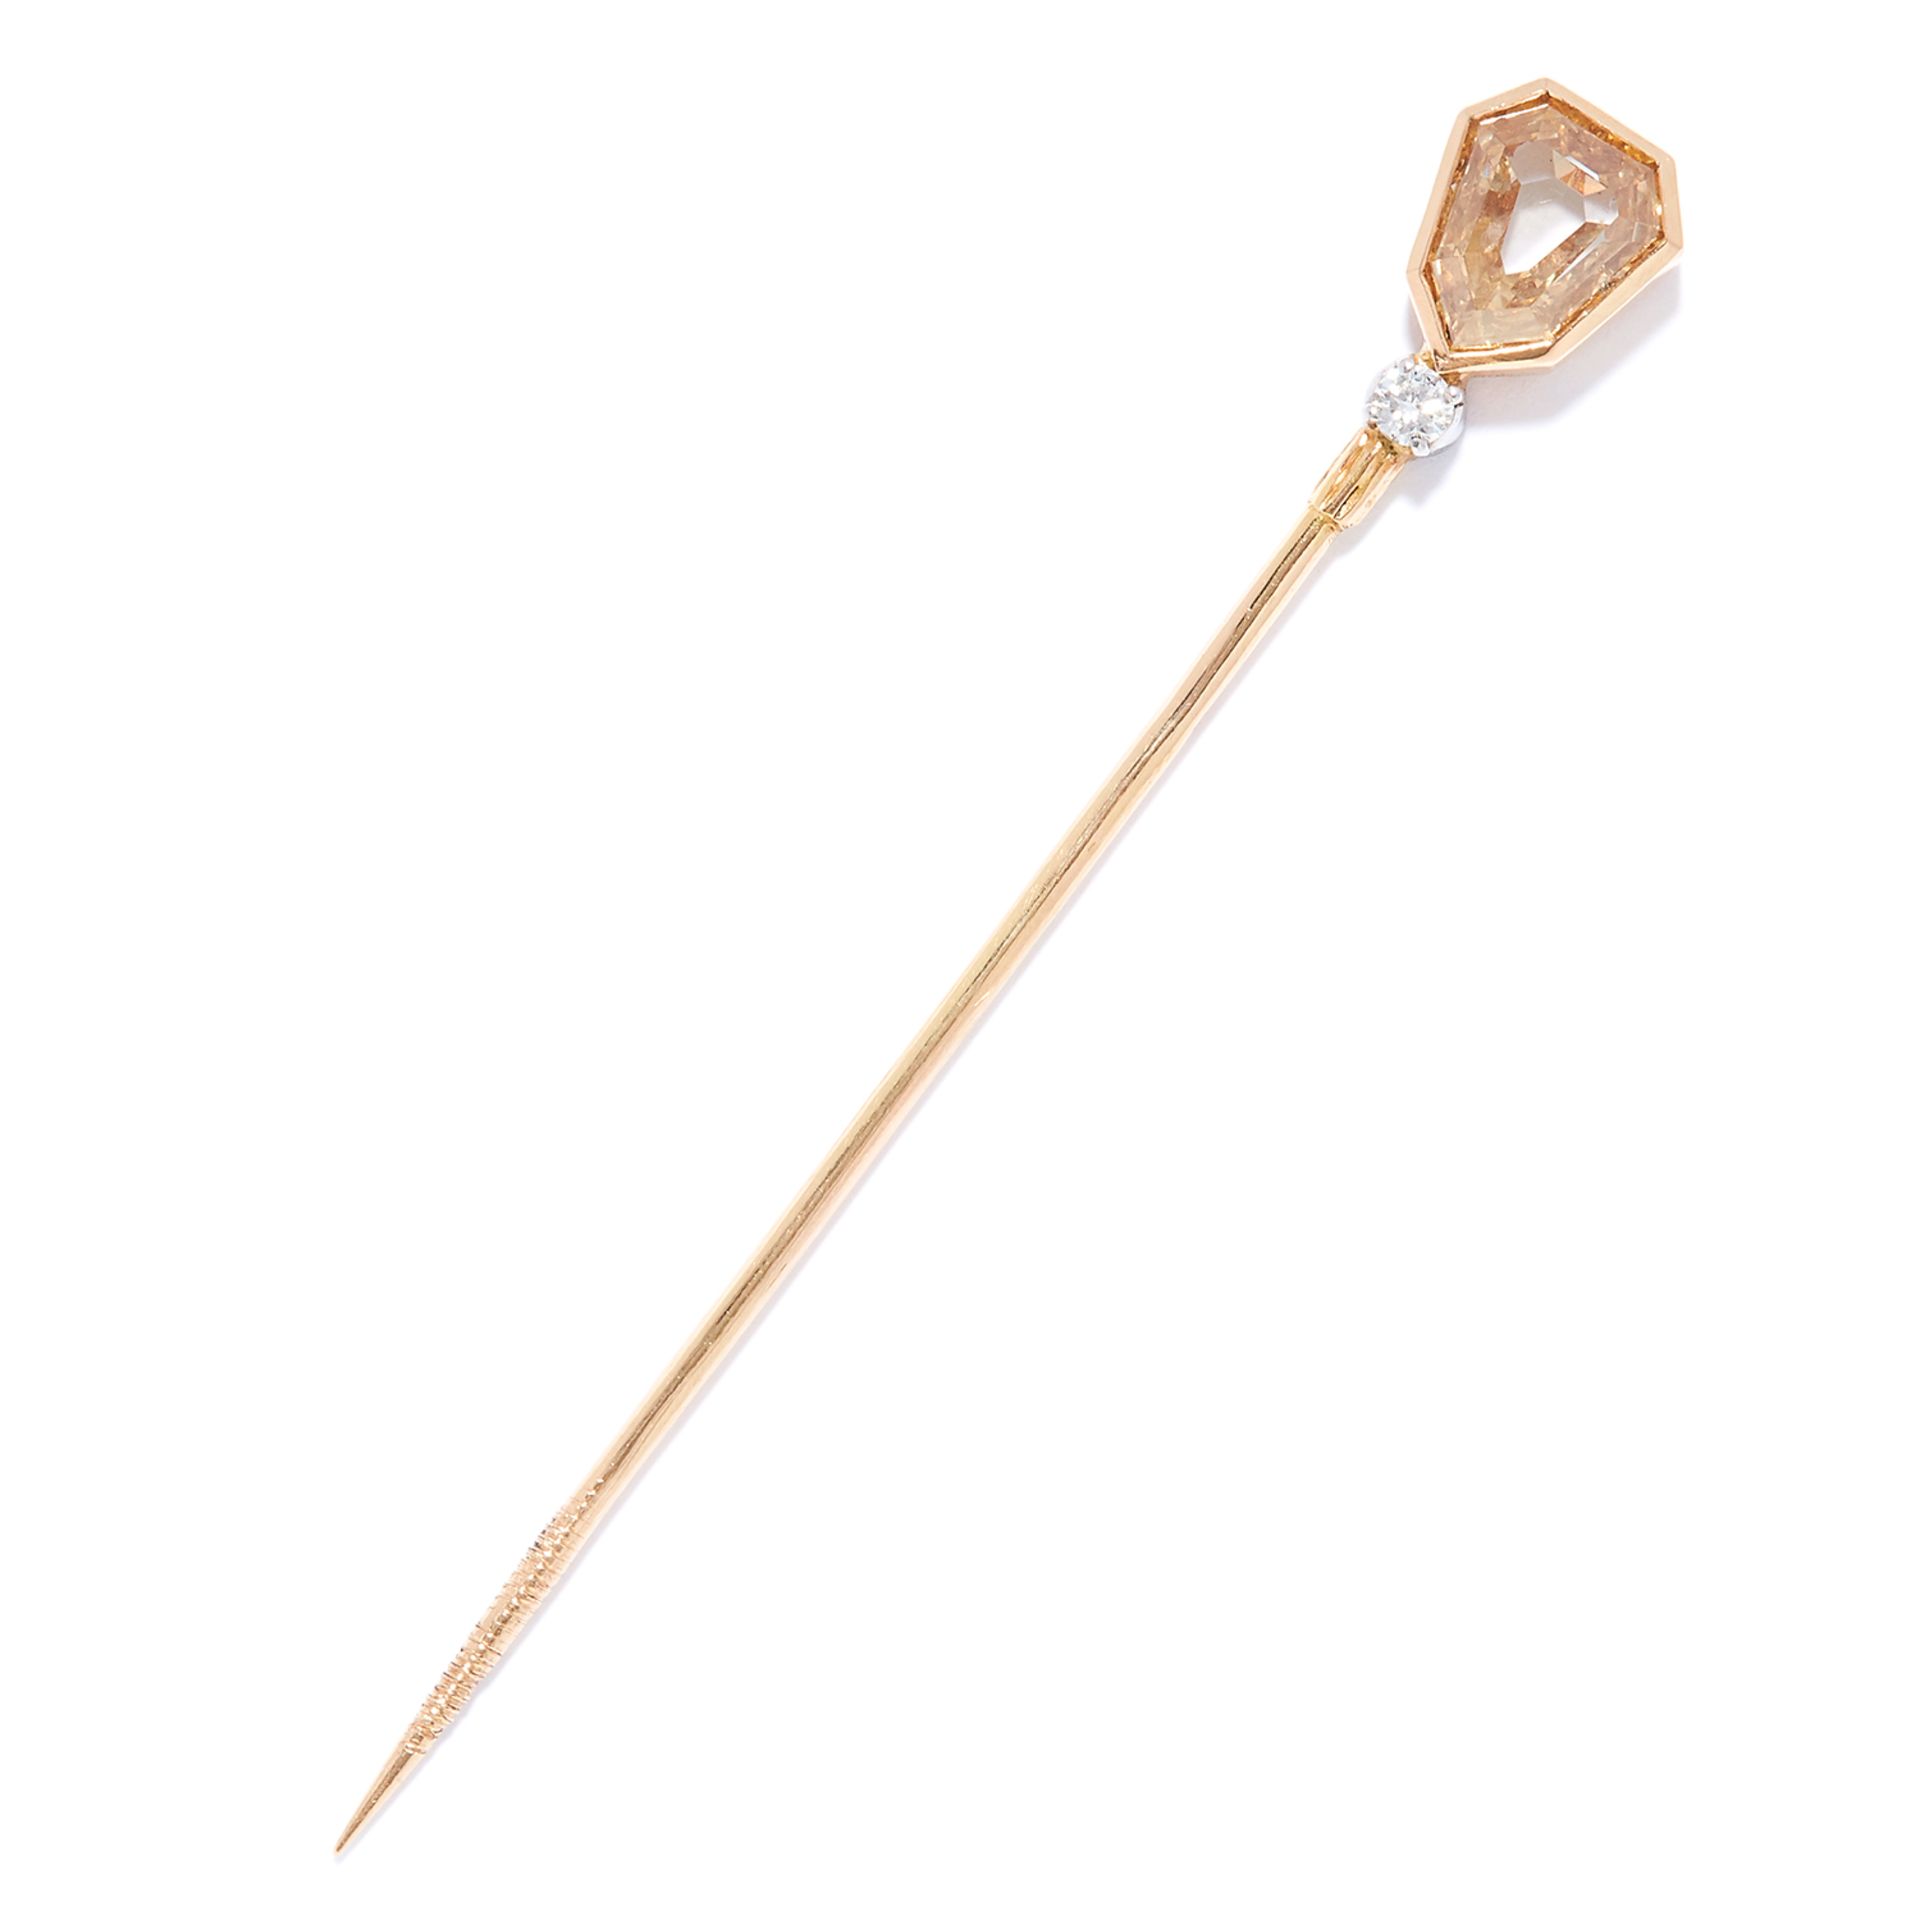 ANTIQUE 1.20 CARAT FANCY COLOUR DIAMOND TIE PIN SIGNED TIFFANY AND CO in 18ct yellow gold, set